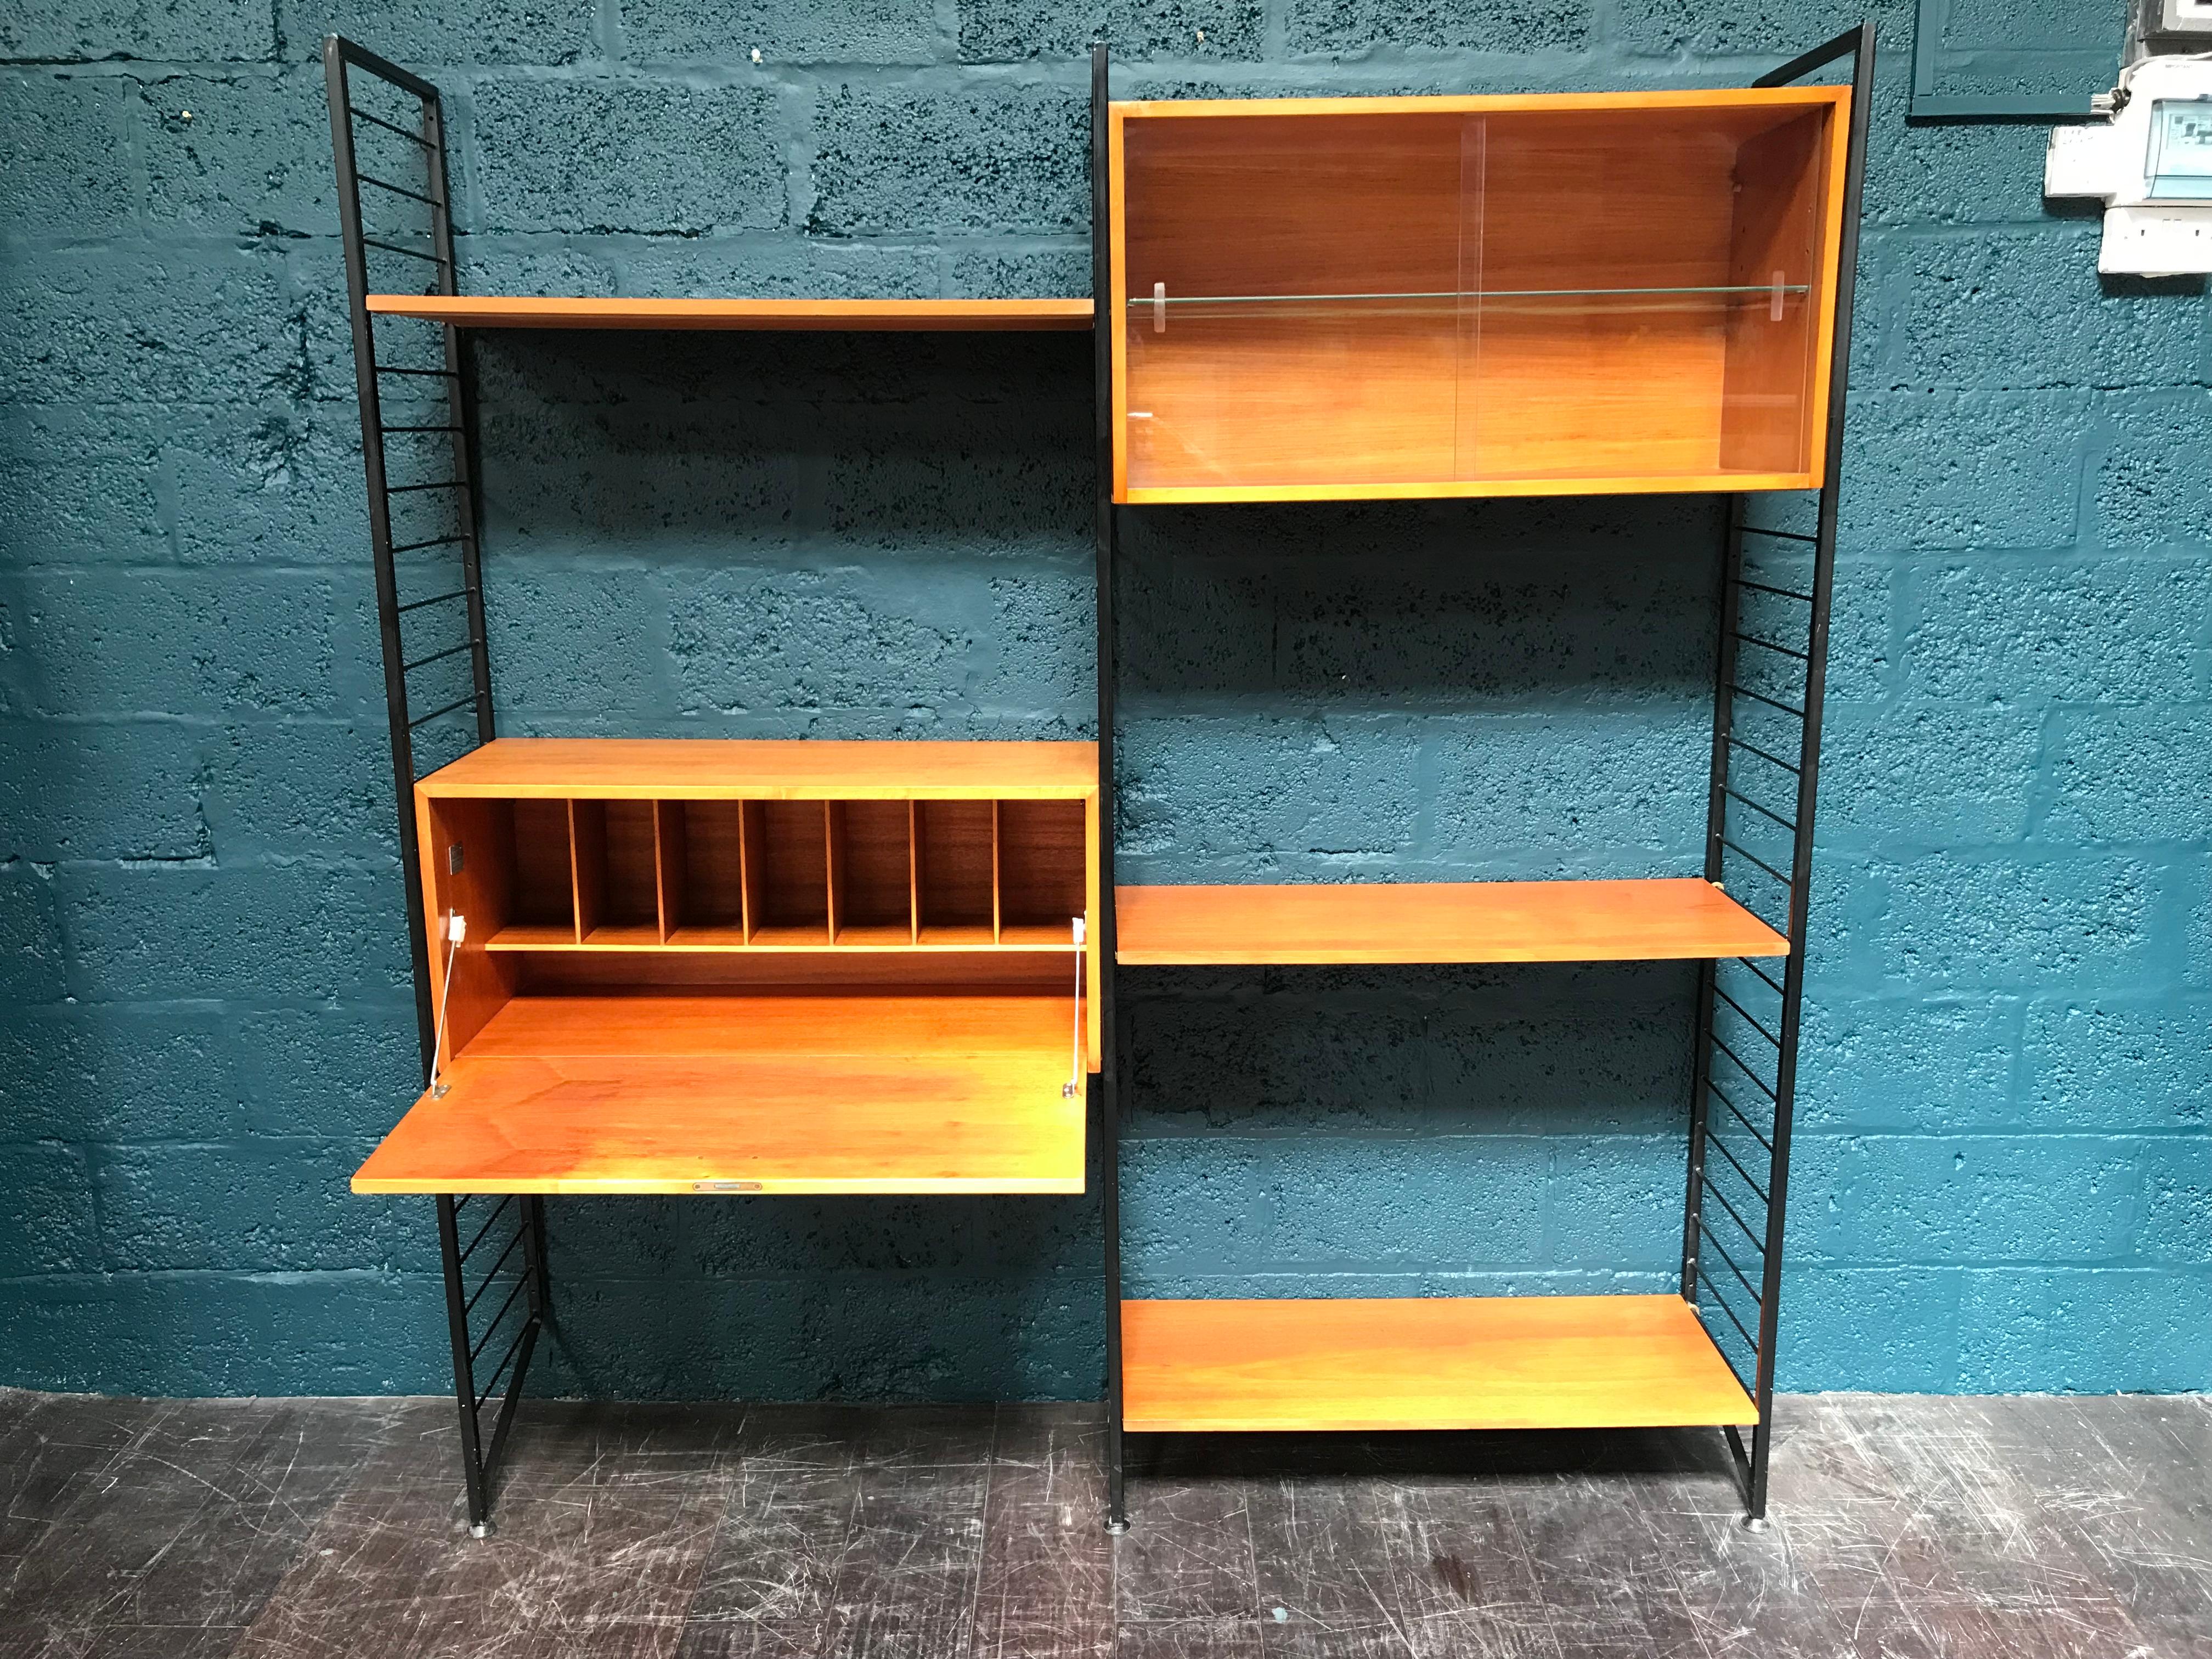 2 Bay Ladderax Teak Midcentury Shelving System with Bureau by Robert Heal For Sale 2